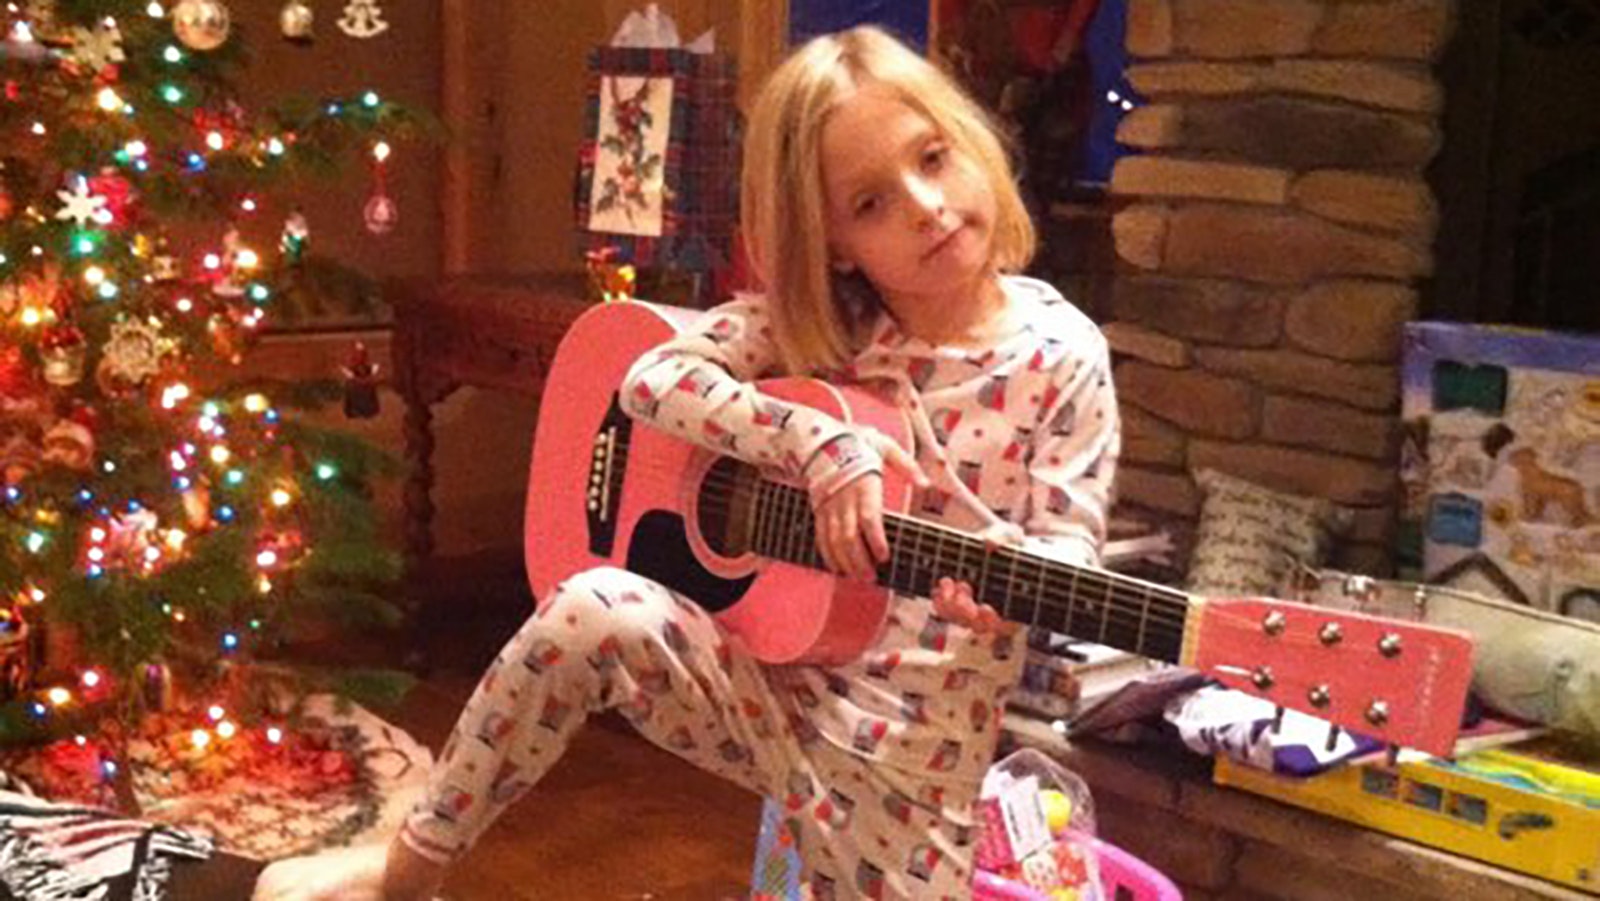 Jillian Nordberg with her first guitar on Christmas Day 2015. She was 6 years old.